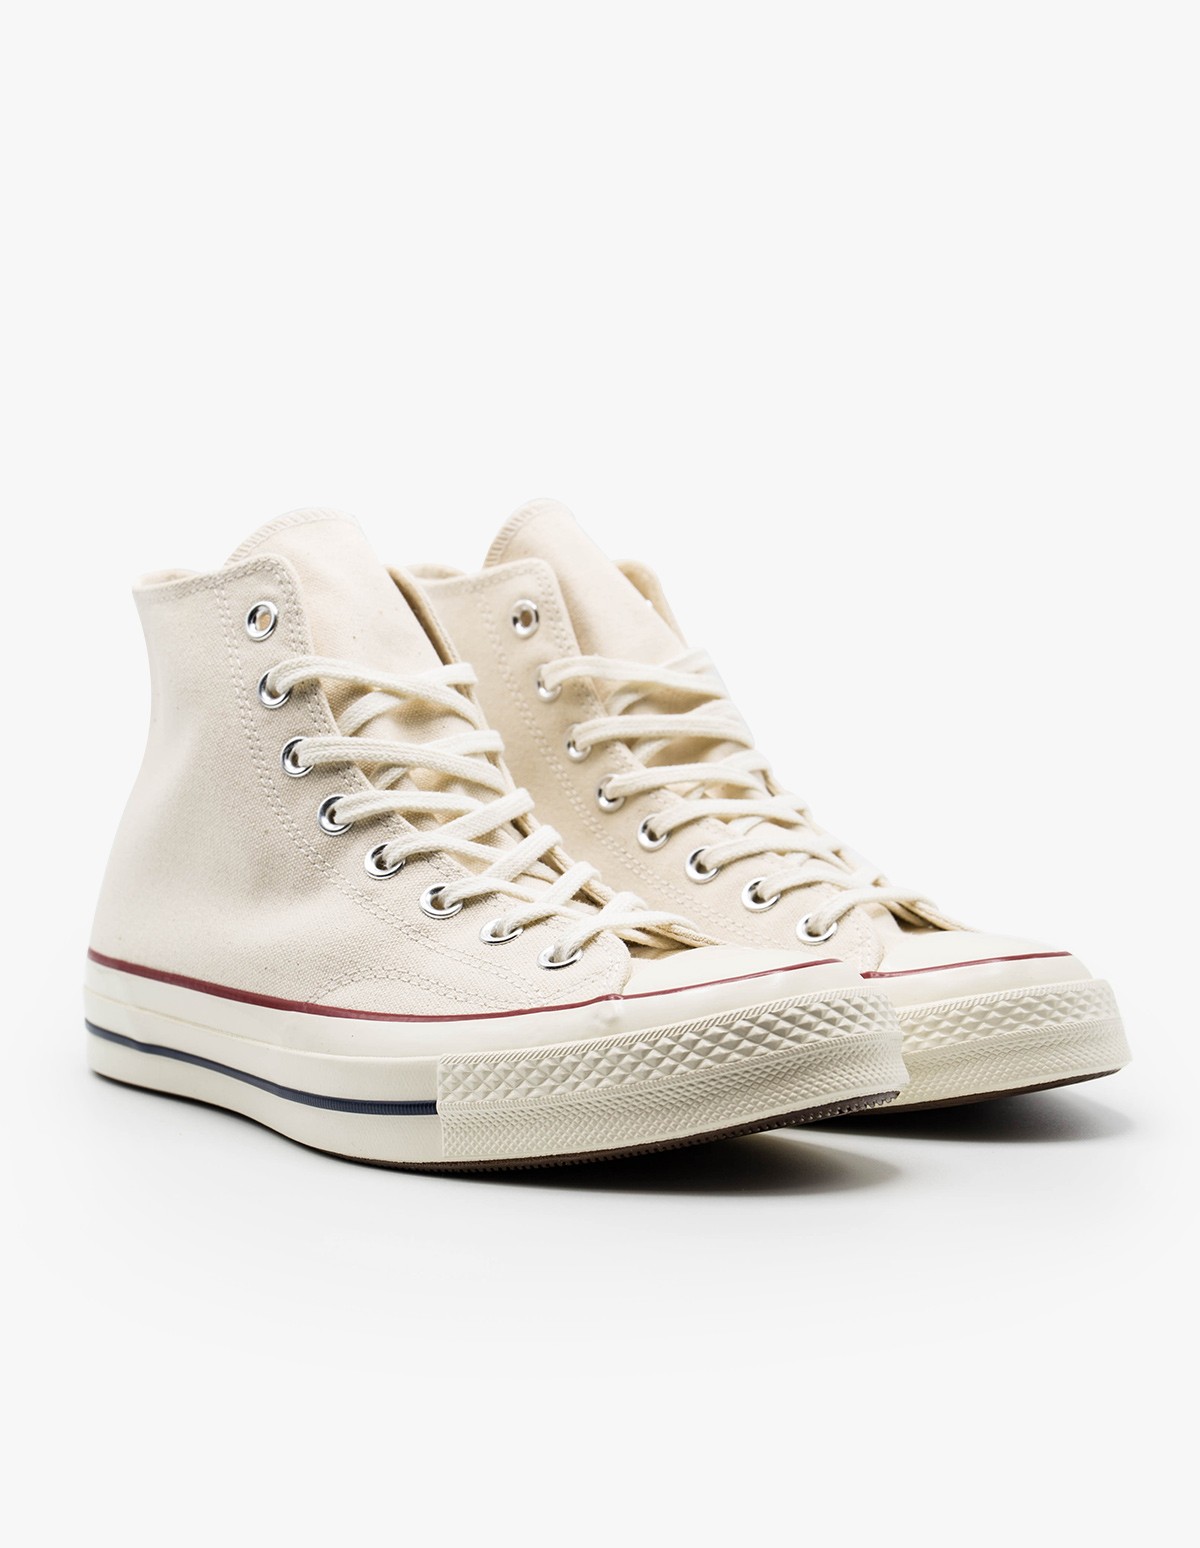 Converse Chuck Taylor High All Star '70 in Parchment Sand 